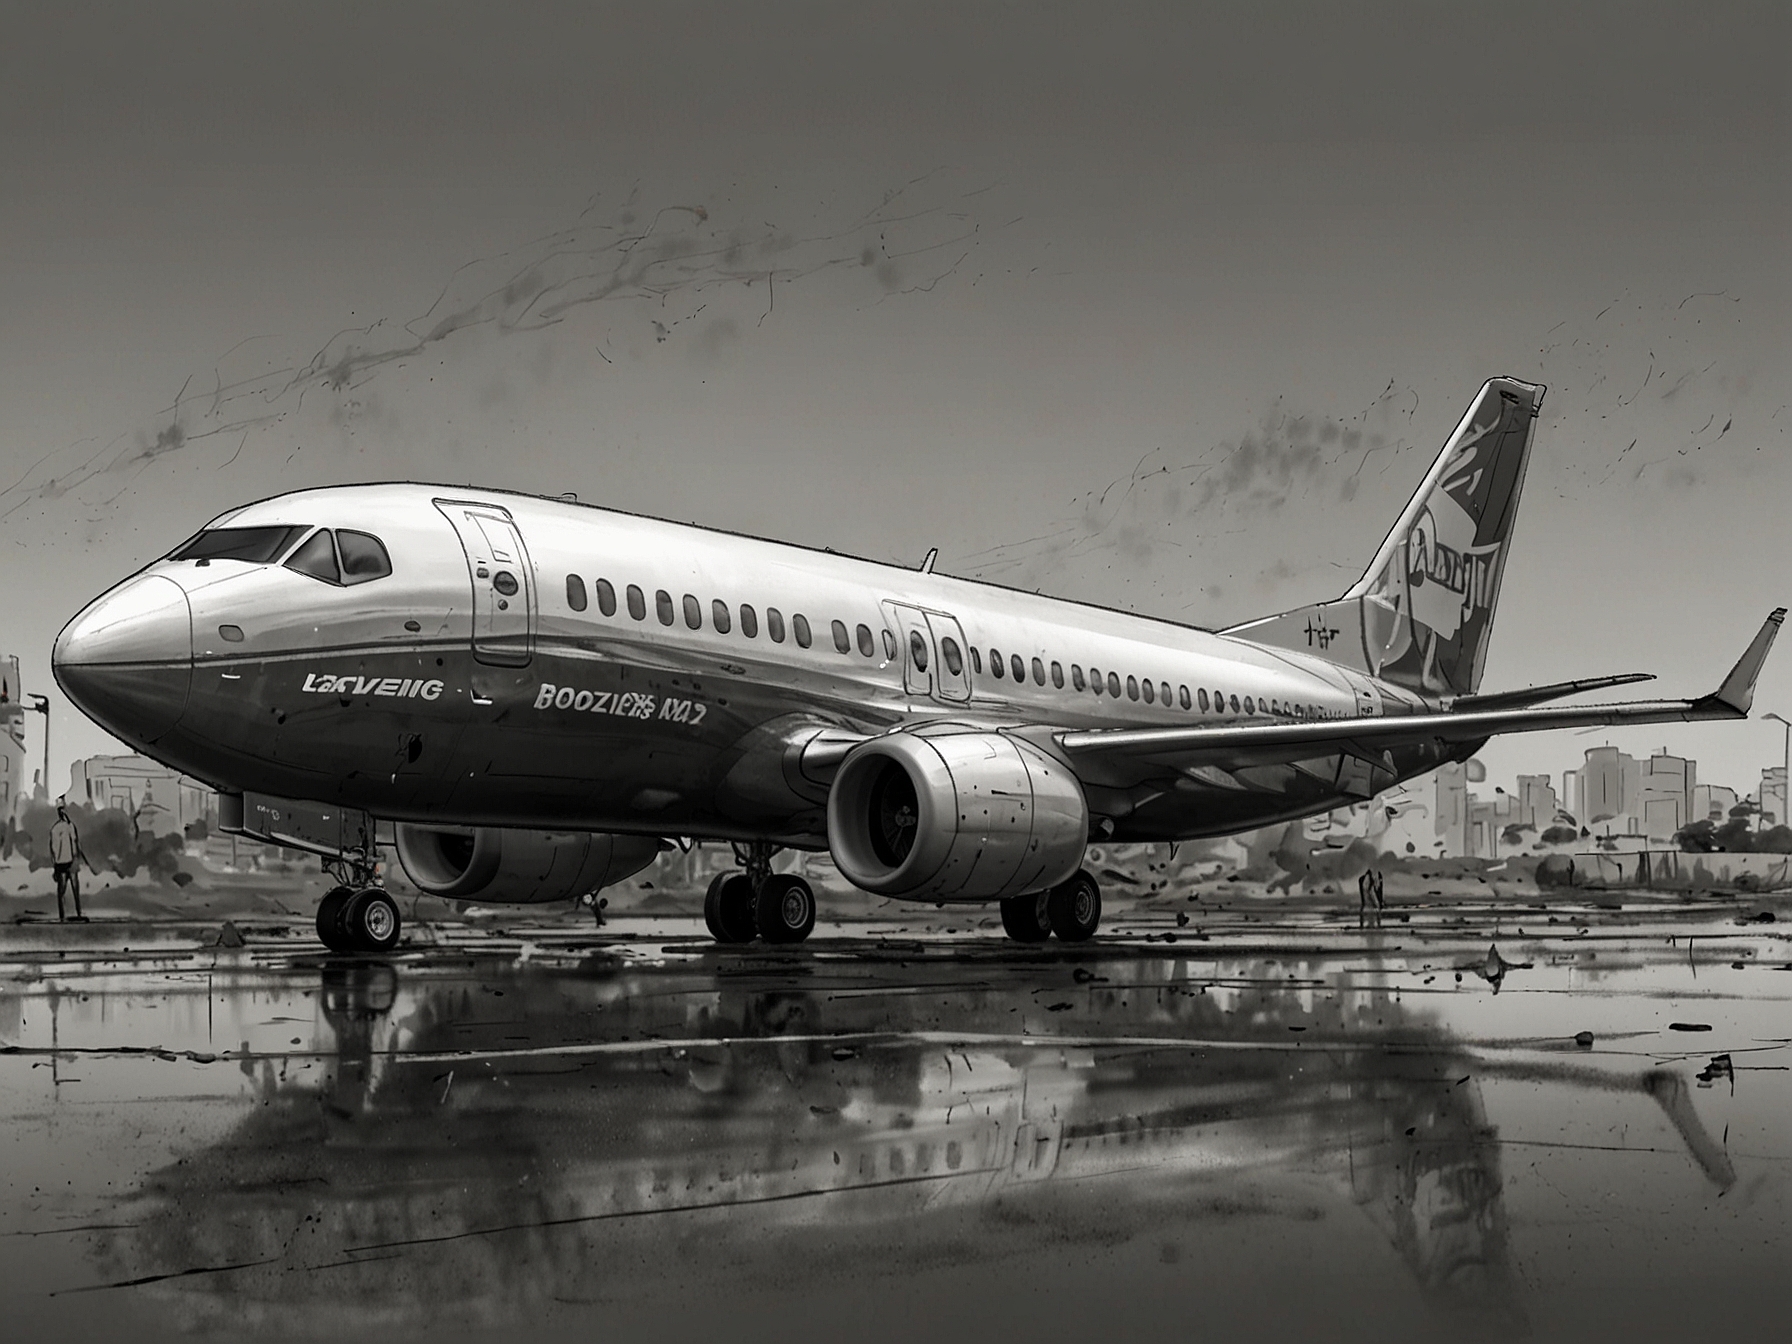 Illustration of Boeing's 737 MAX aircraft grounded, representing the challenges the company faces with safety issues, halted deliveries, and its efforts to restore investor and public trust amid ongoing scrutiny.